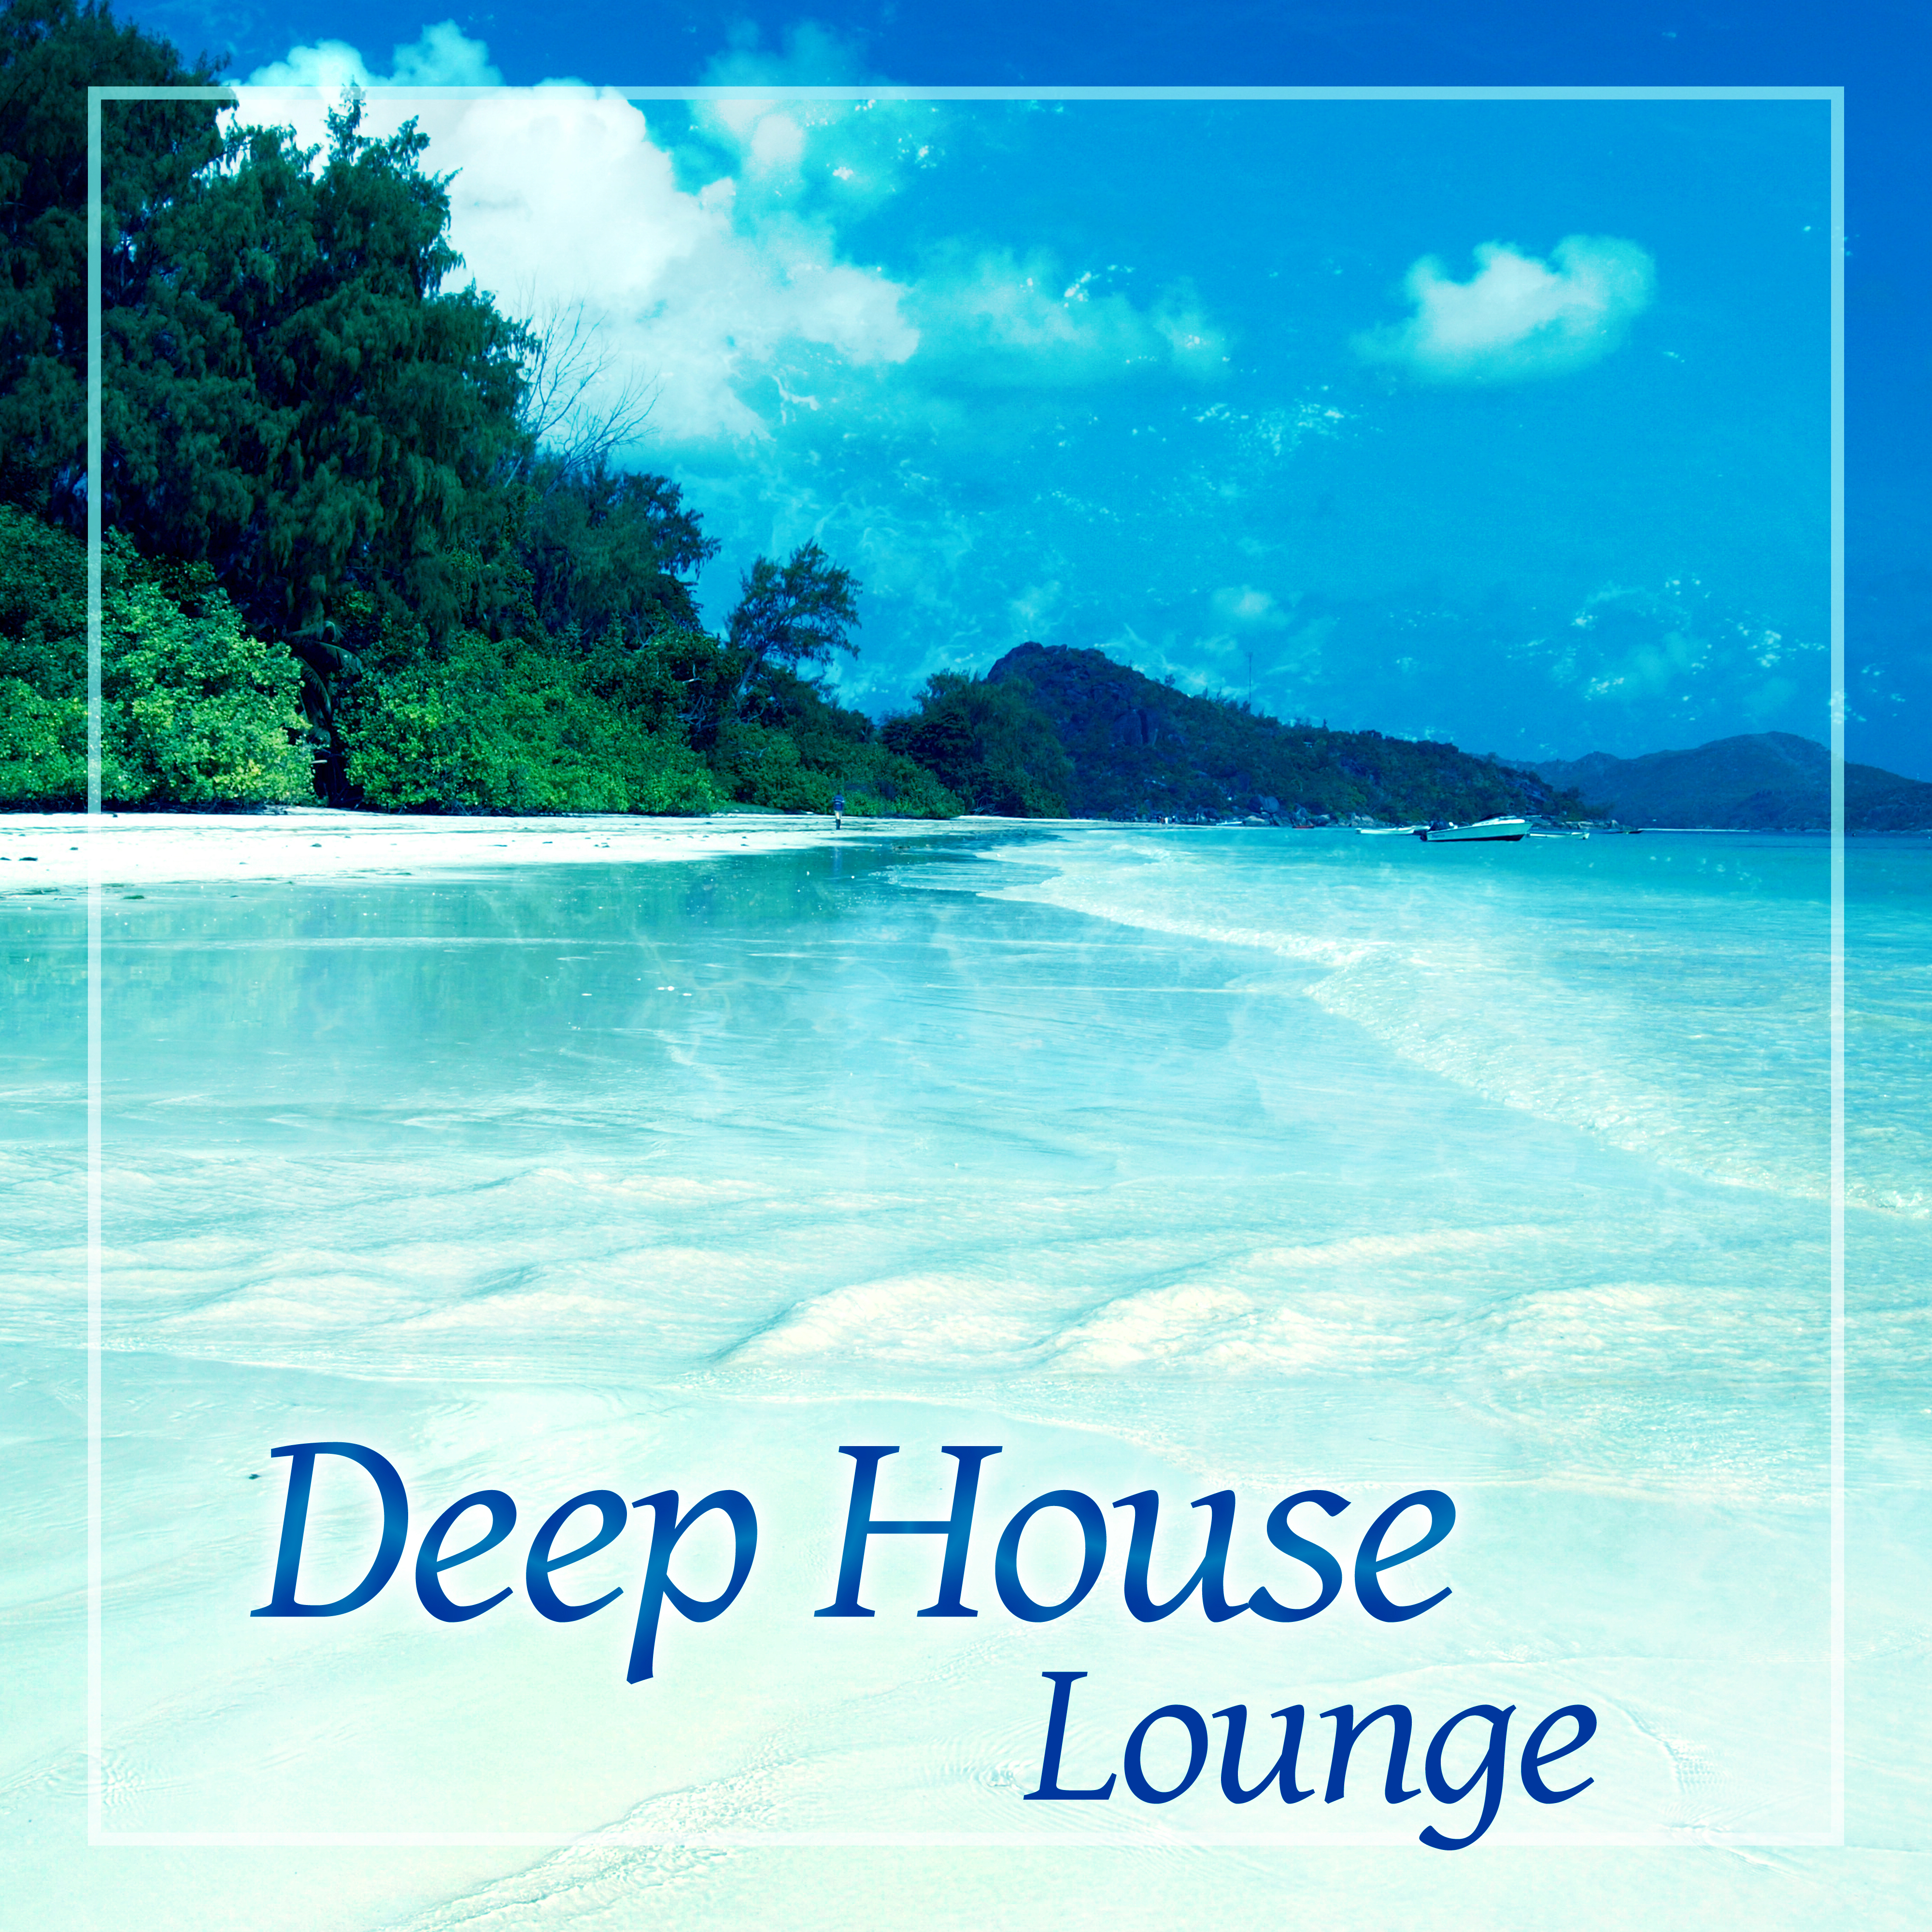 Deep House Lounge – Chill Out Music, Positive Vibes, Beach Party, Ibiza Chill Out, Ambient Lounge